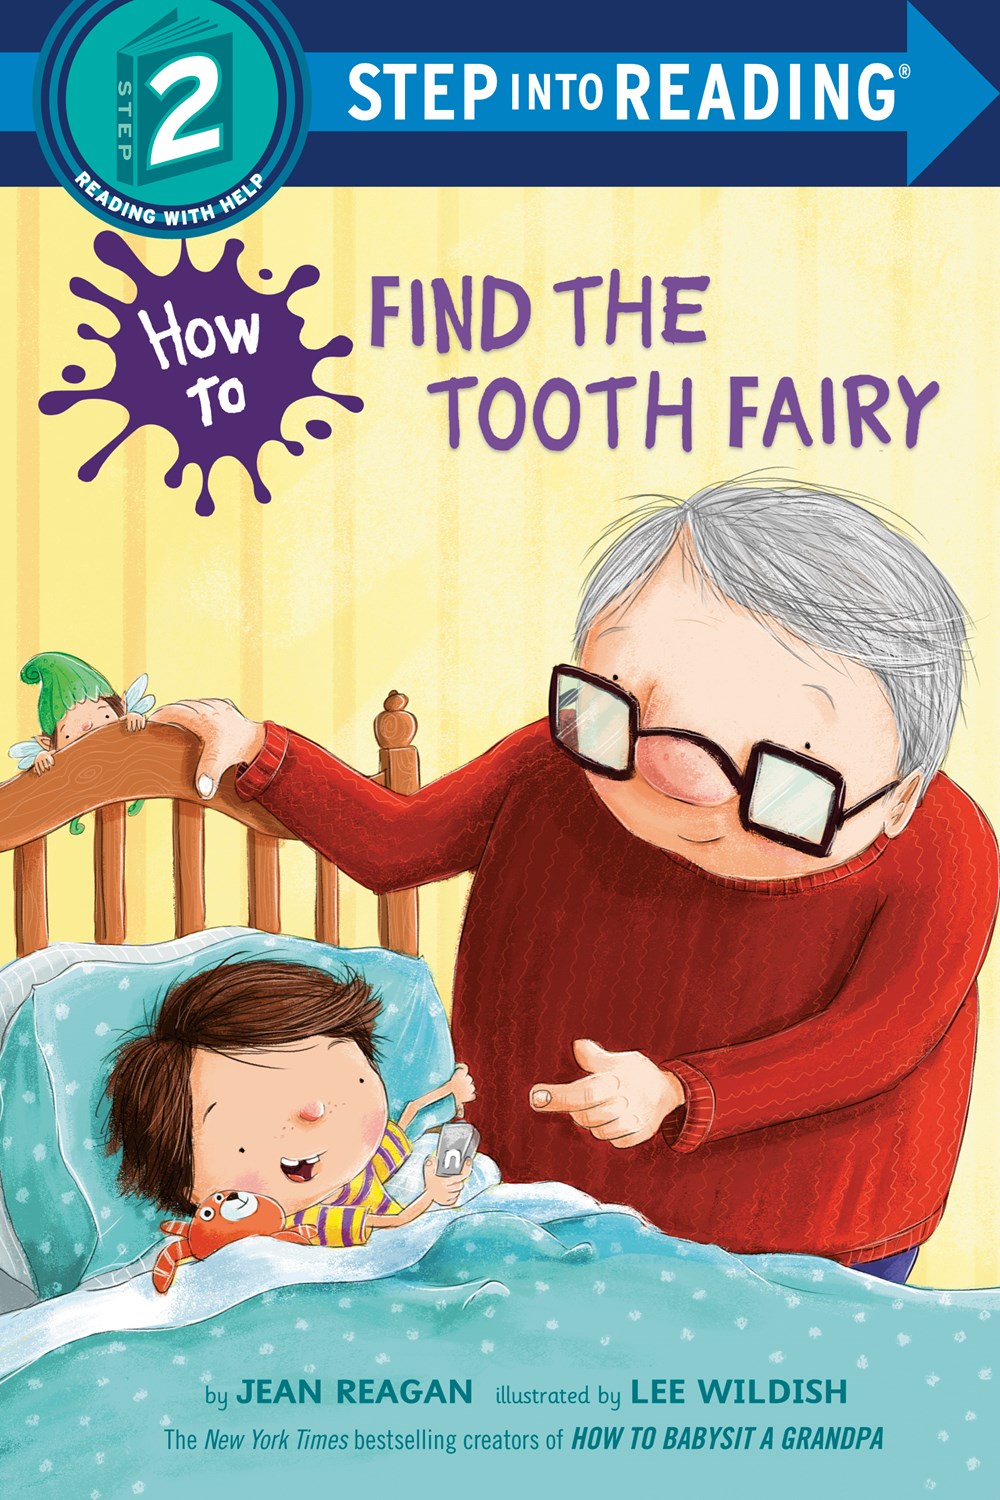 Step Into Reading: How to Find the Tooth Fairy